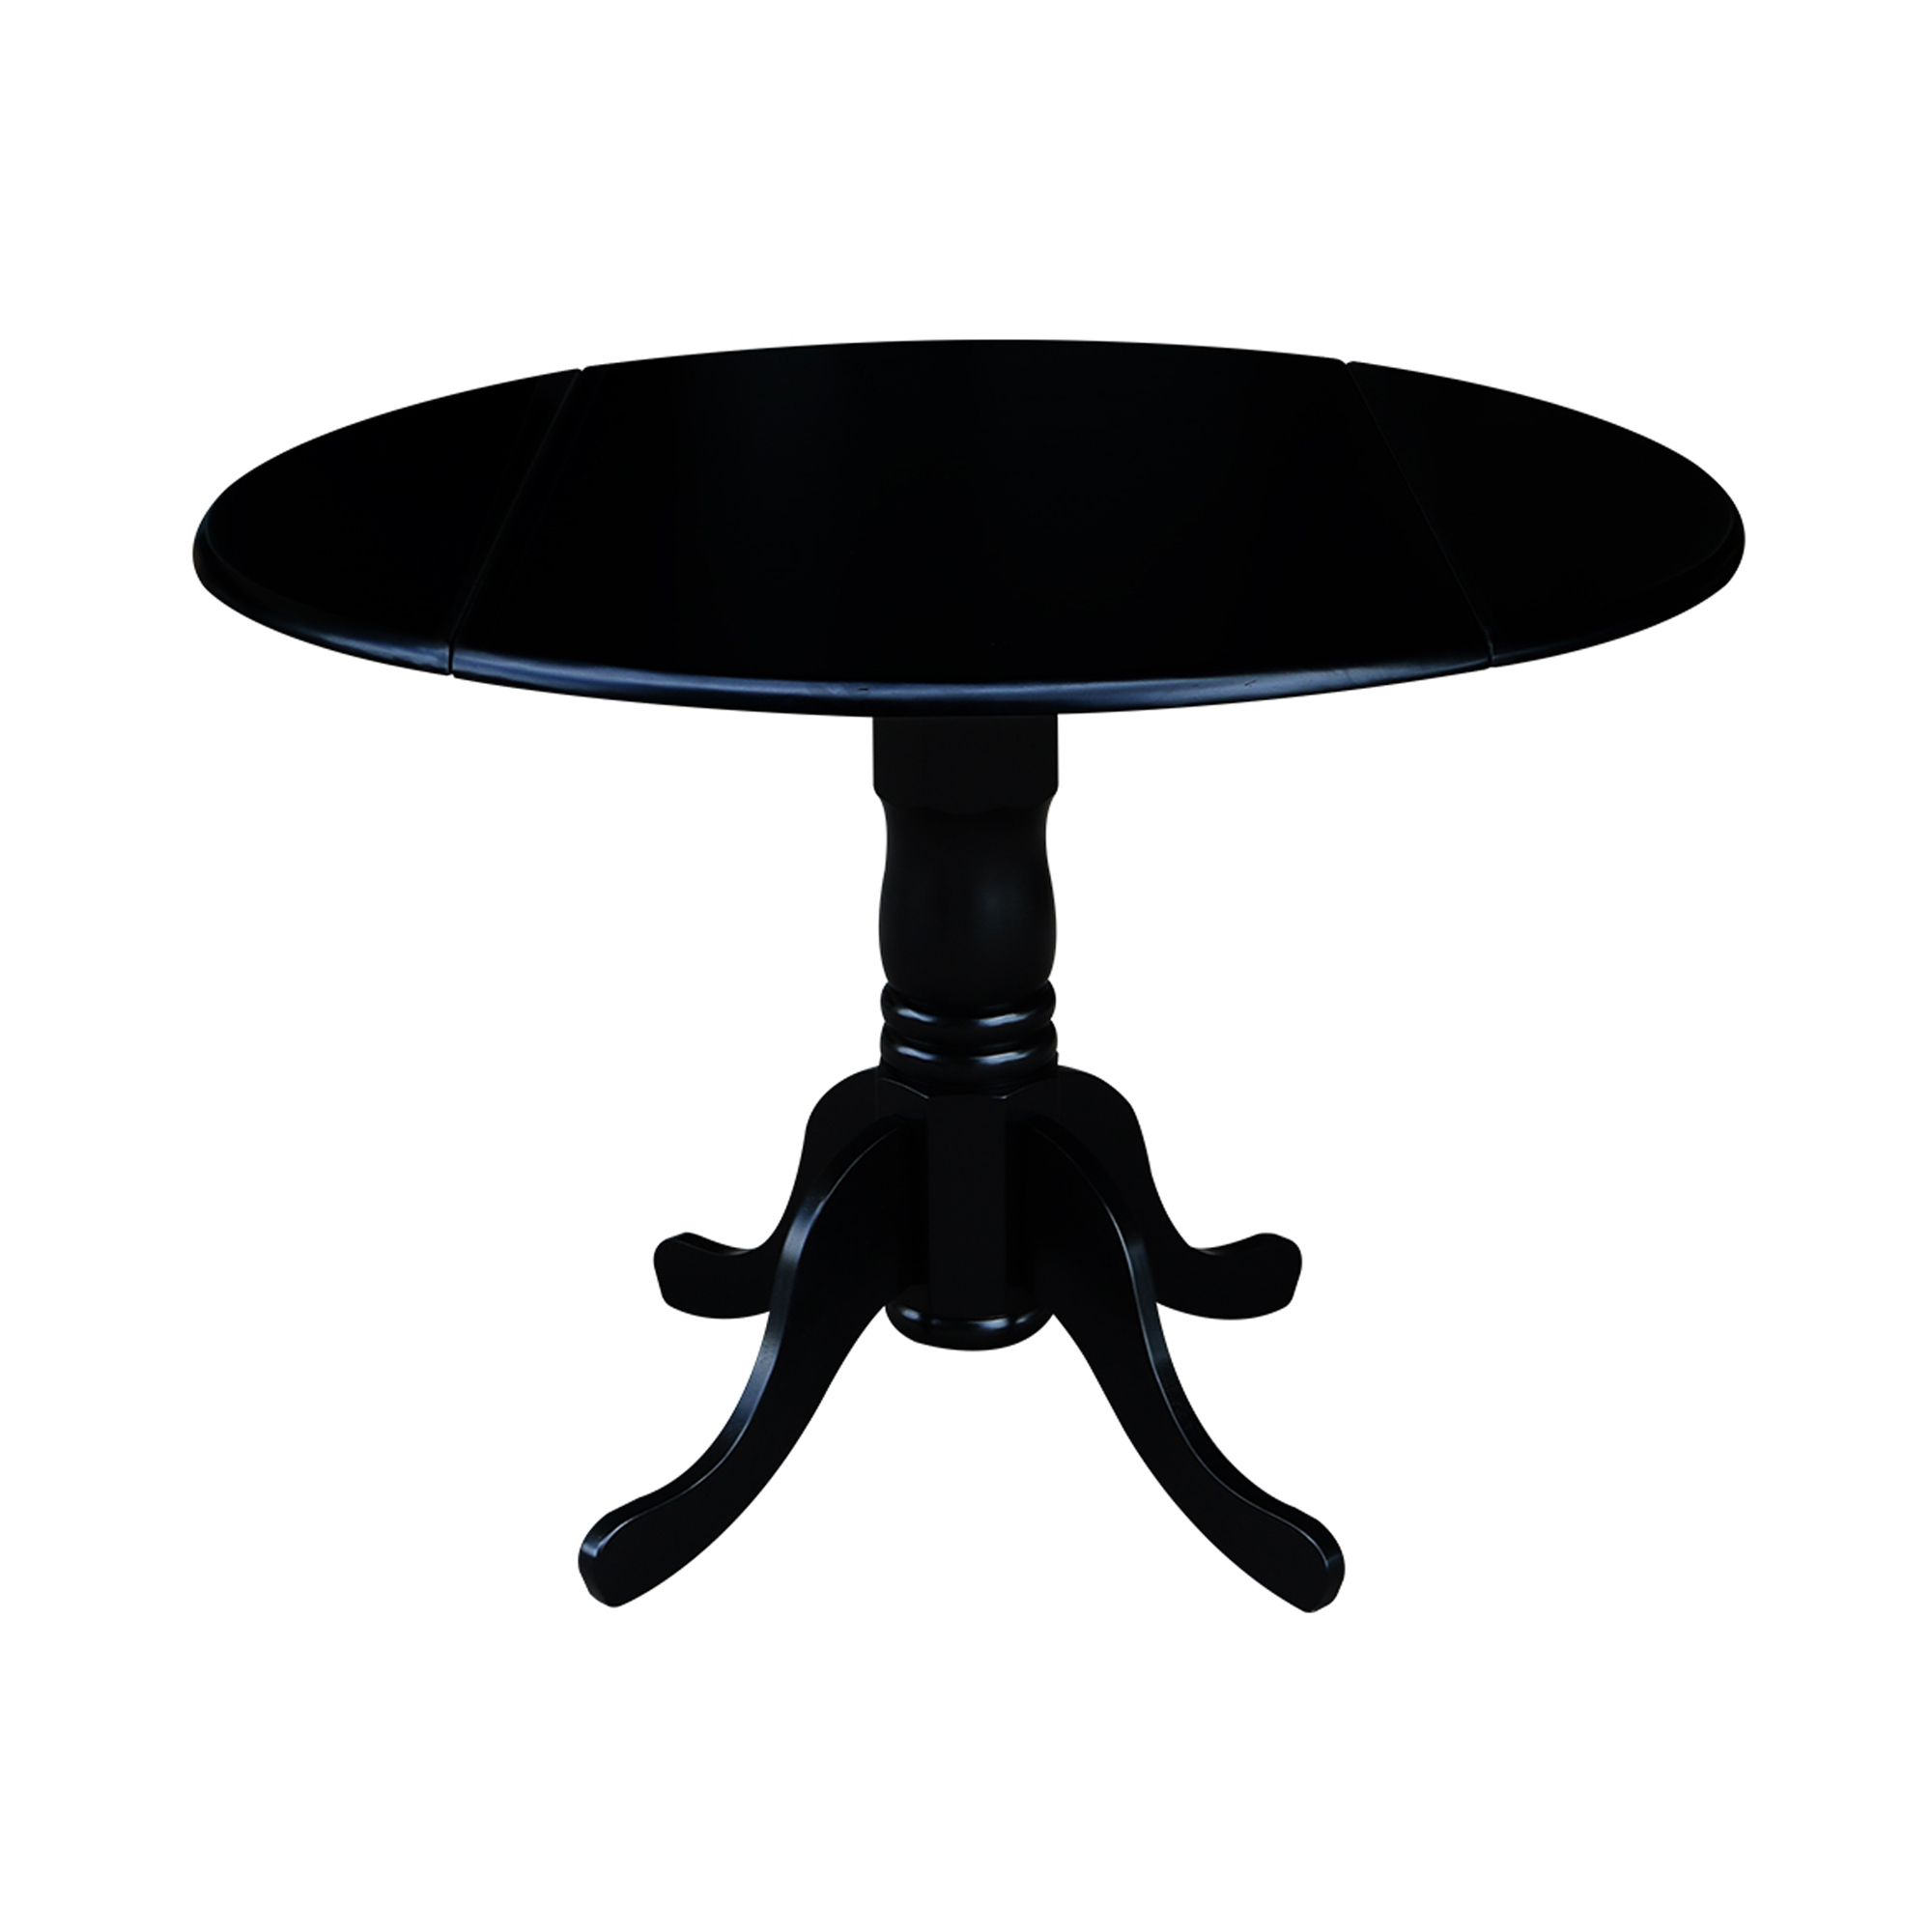 Round Pedestal Dining Tables With One Leaf Intended For Most Up To Date International Concepts 42" Round Dual Drop Leaf Pedestal (View 13 of 20)